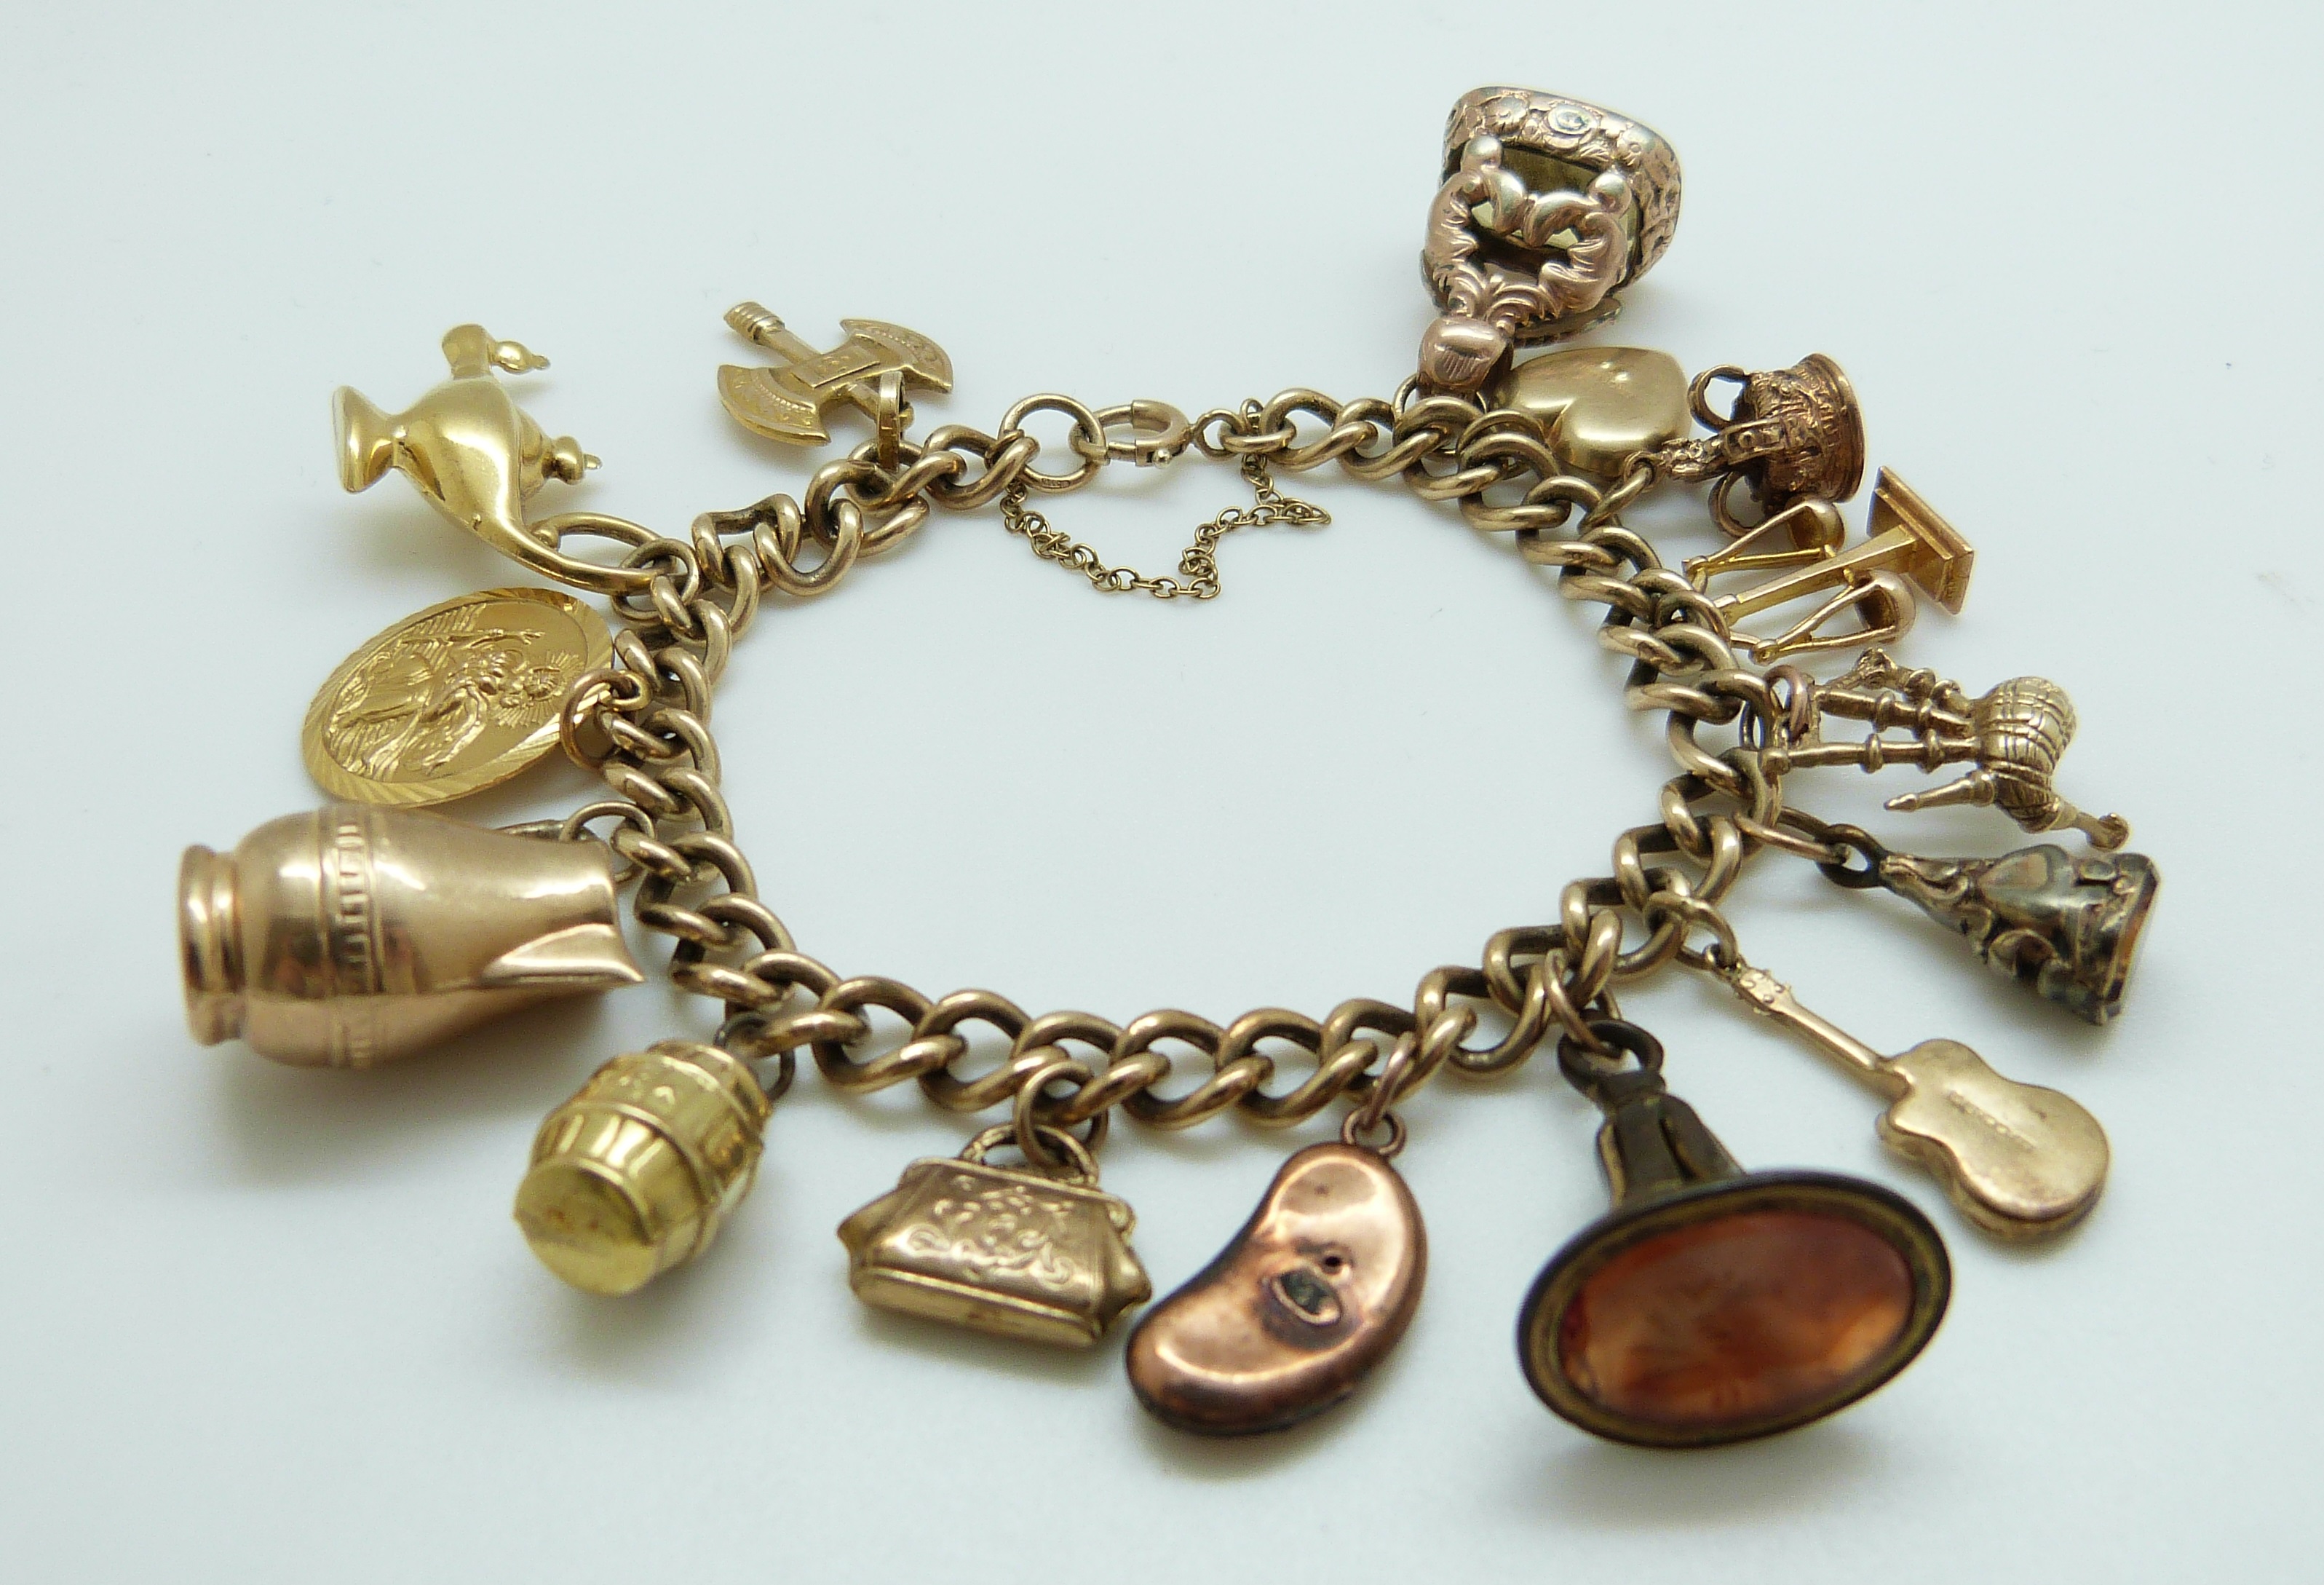 A 9ct gold charm bracelet with eleven 9ct gold charms including a crown, St Christopher, purse, - Image 3 of 8